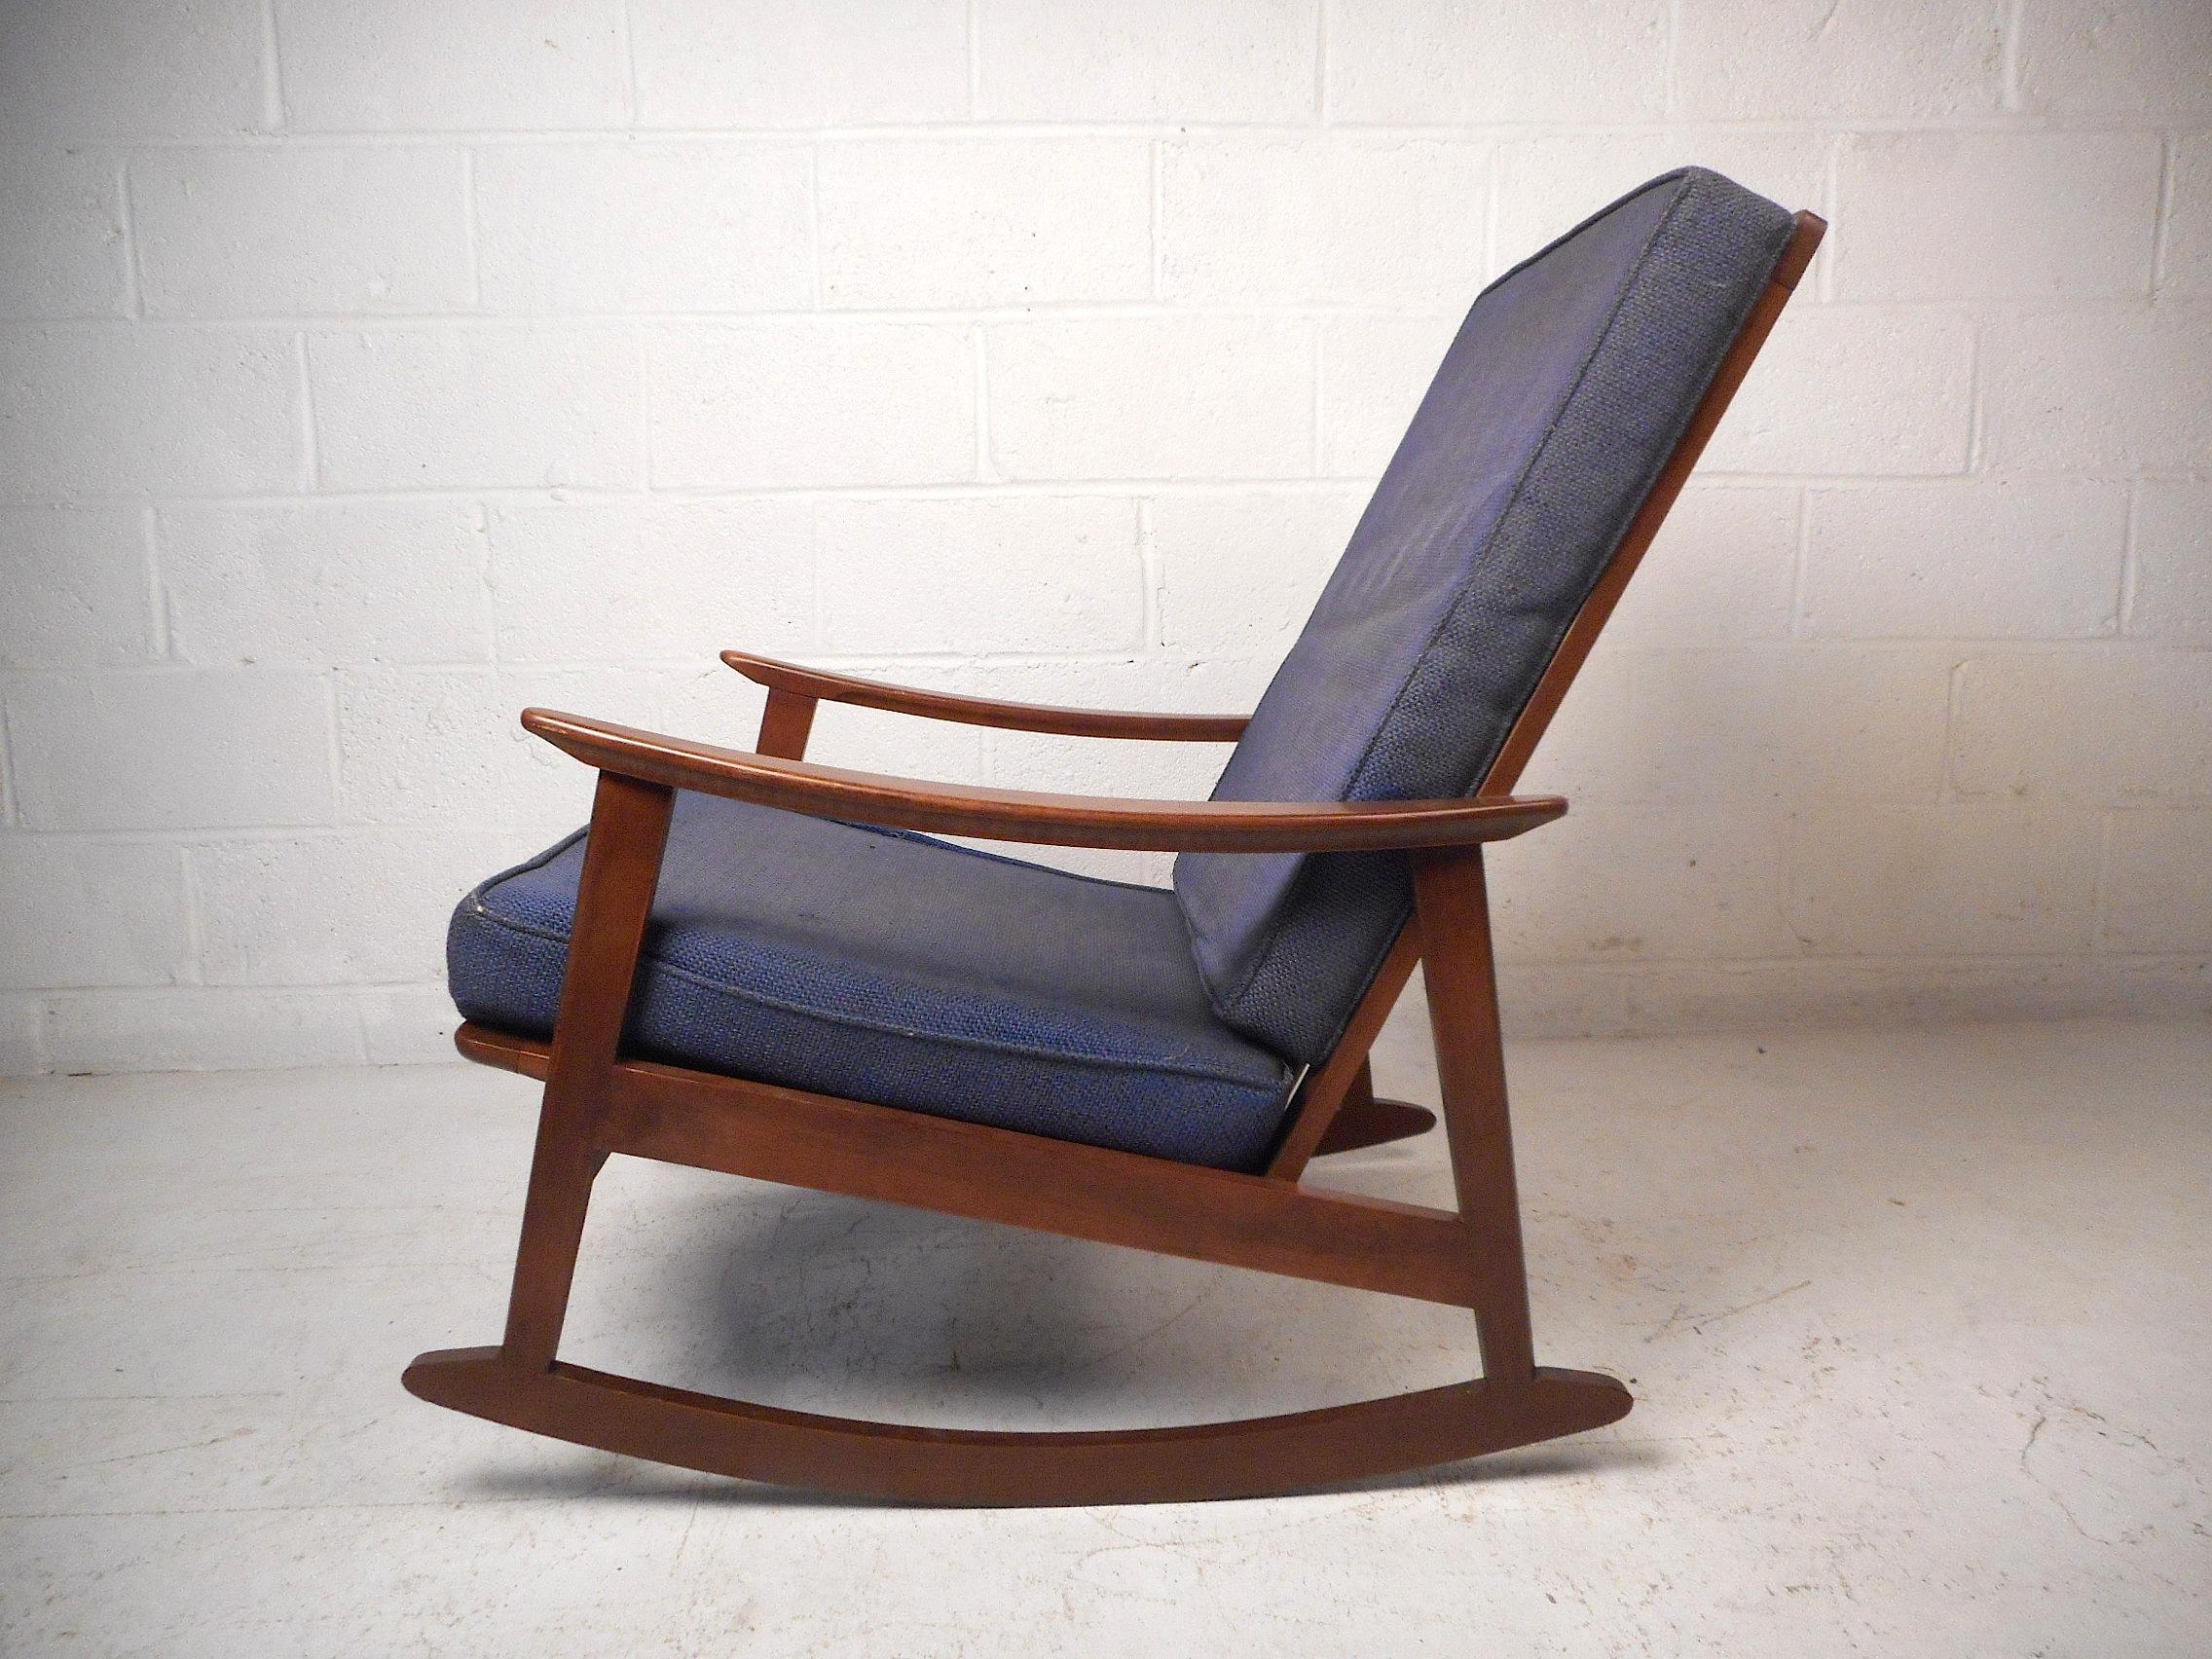 This impressive vintage modern rocking chair features a sturdy walnut construction, sleekly sculpted armrests, and a tall backrest ensuring both comfort and style. A great addition to any modern interior. Please confirm item location with dealer (NJ